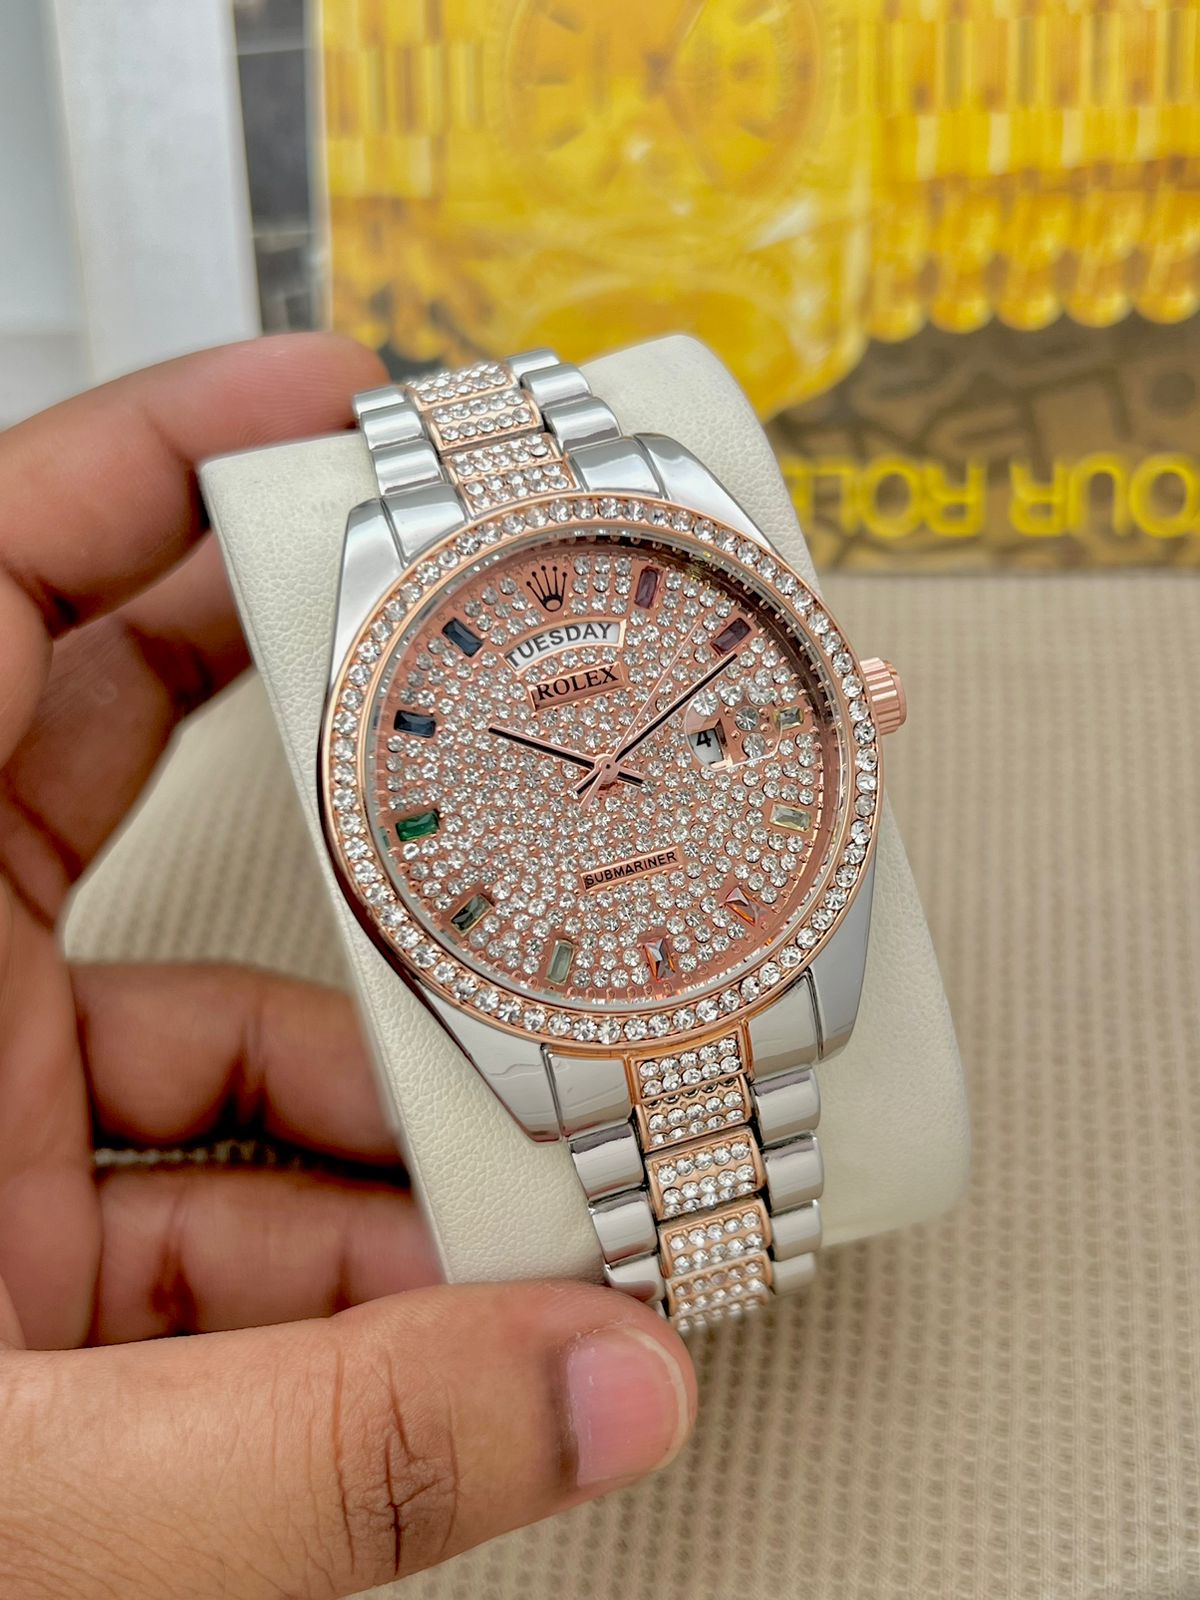 High quality Rolex Men’s Daimond Date & day 7A Watch